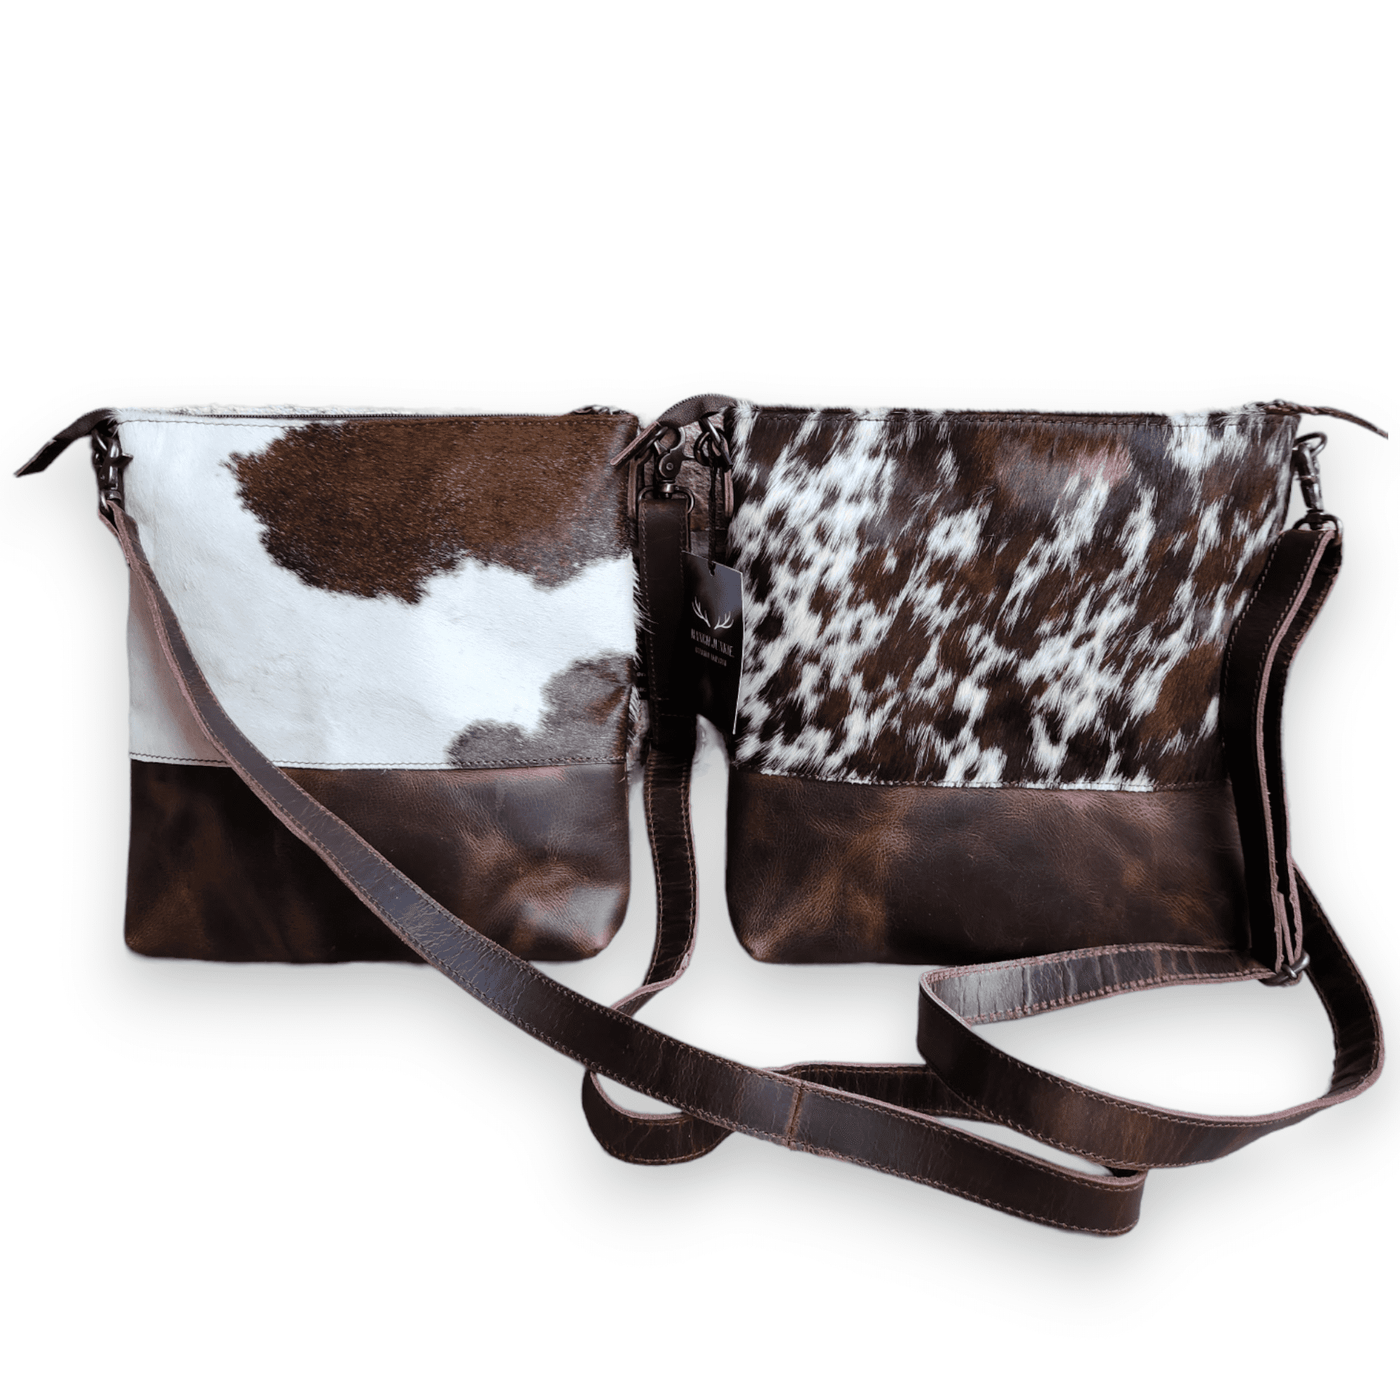 The Highlands Genuine Cowhide Large Crossbody Bag Saddle And Dark Brown Leather Luggage & BagsRanch Junkie